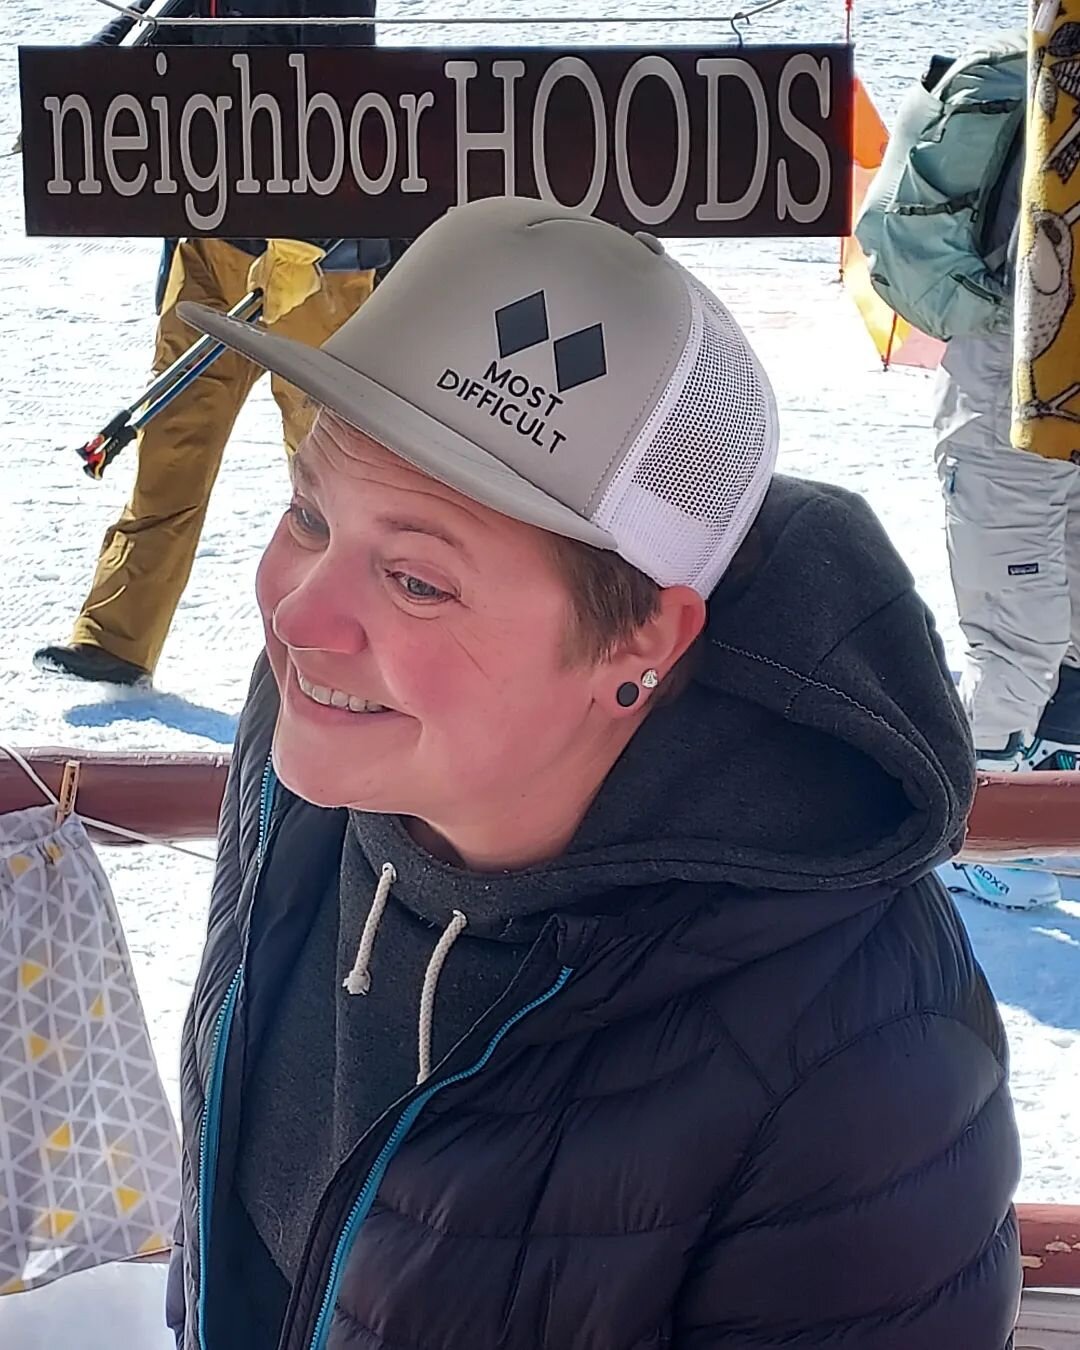 @neighbor_hoods looking fresh in her new most difficult hat. Thank you, Kate, for your purchase. Everyone has their own take on what this text means to them. Kate at @neighbor_hoods
Sells the best hoods. 

If you missed getting yours, just reach out 